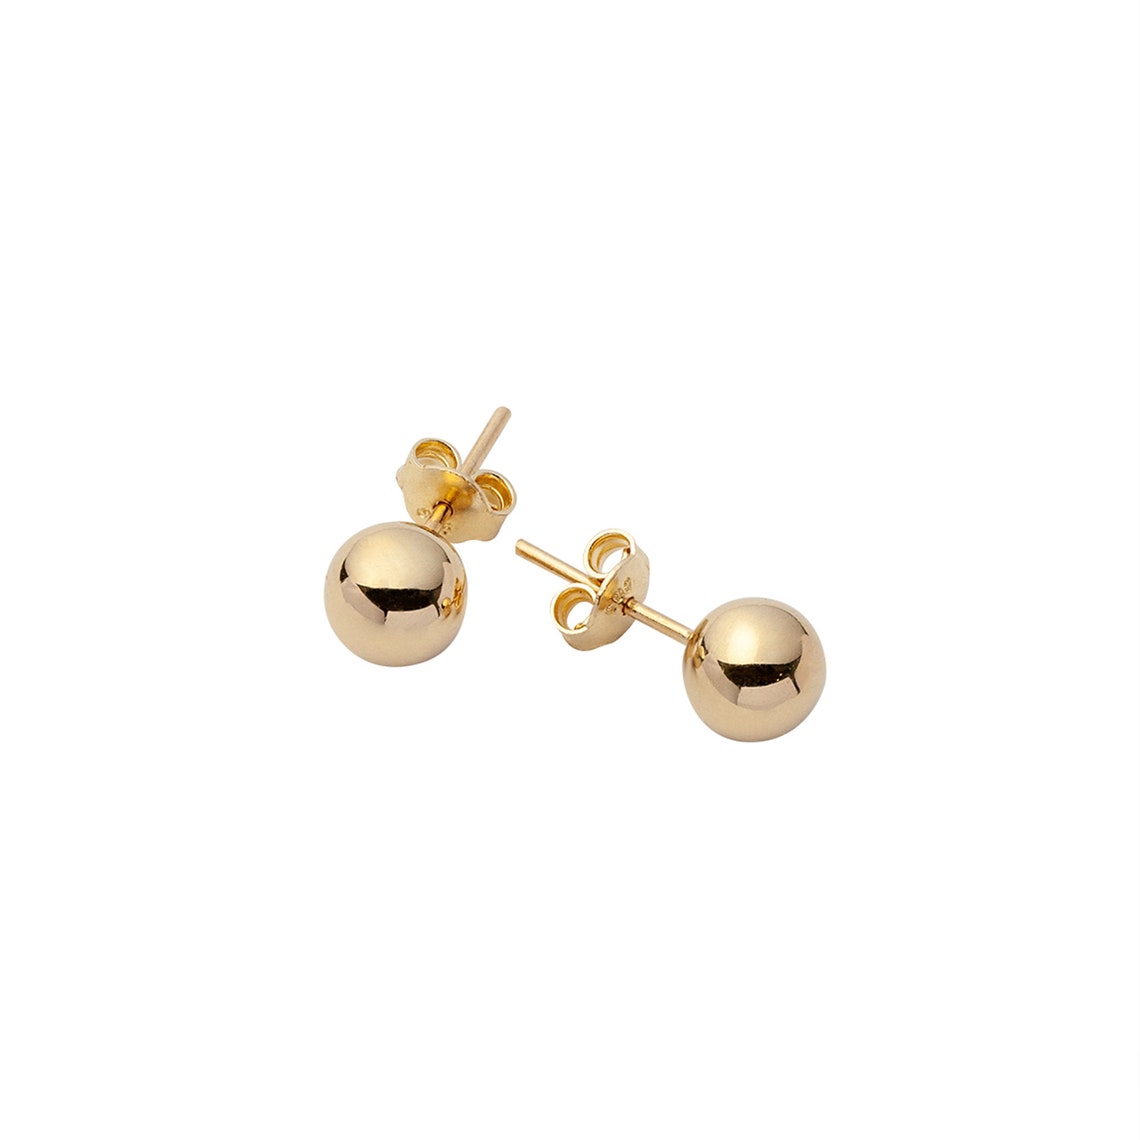 14K Yellow Solid Gold High Polished Ball Stud Earrings - Etsy